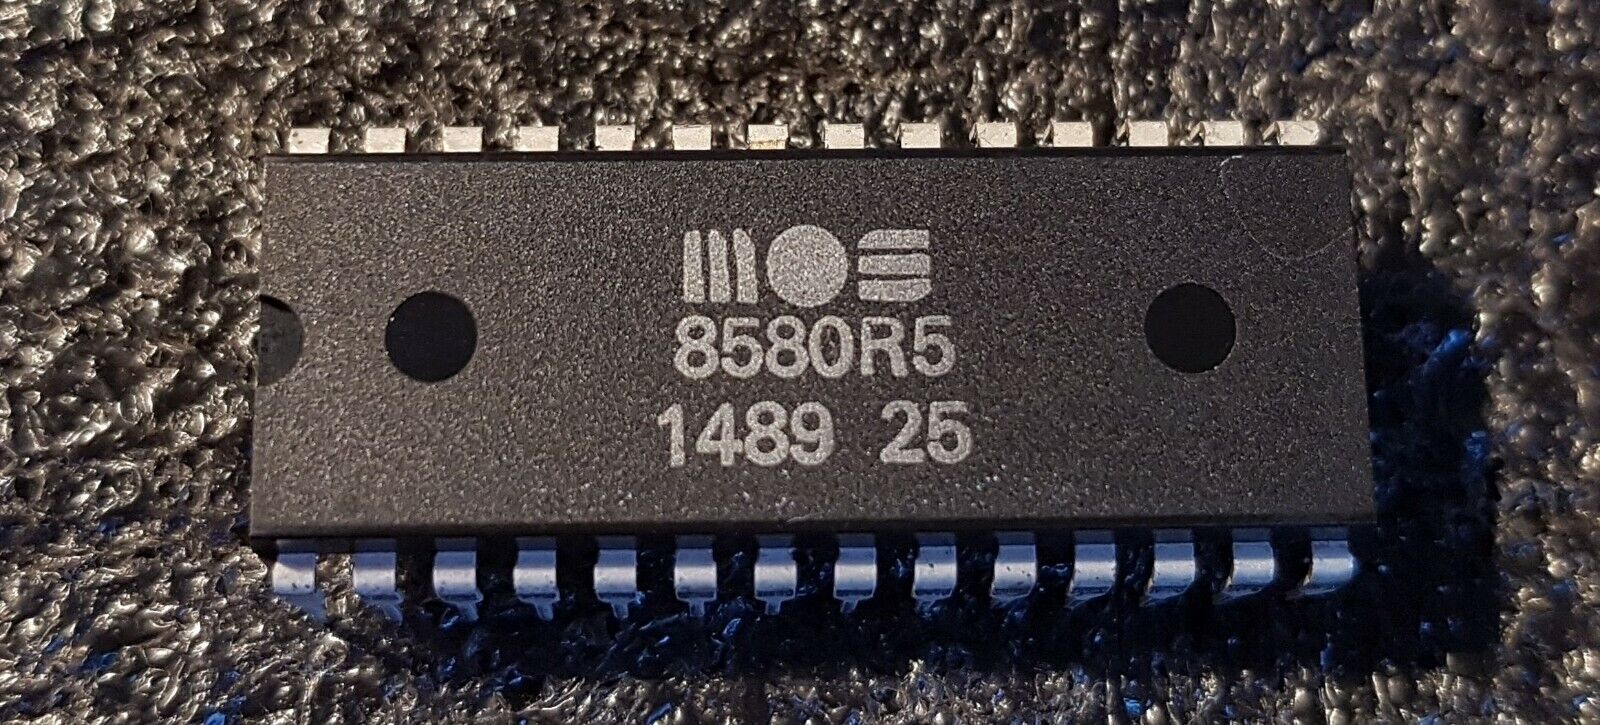 MOS 8580R5 SID Chip, for Commodore 64, Genuine part, Tested & working. ExRare